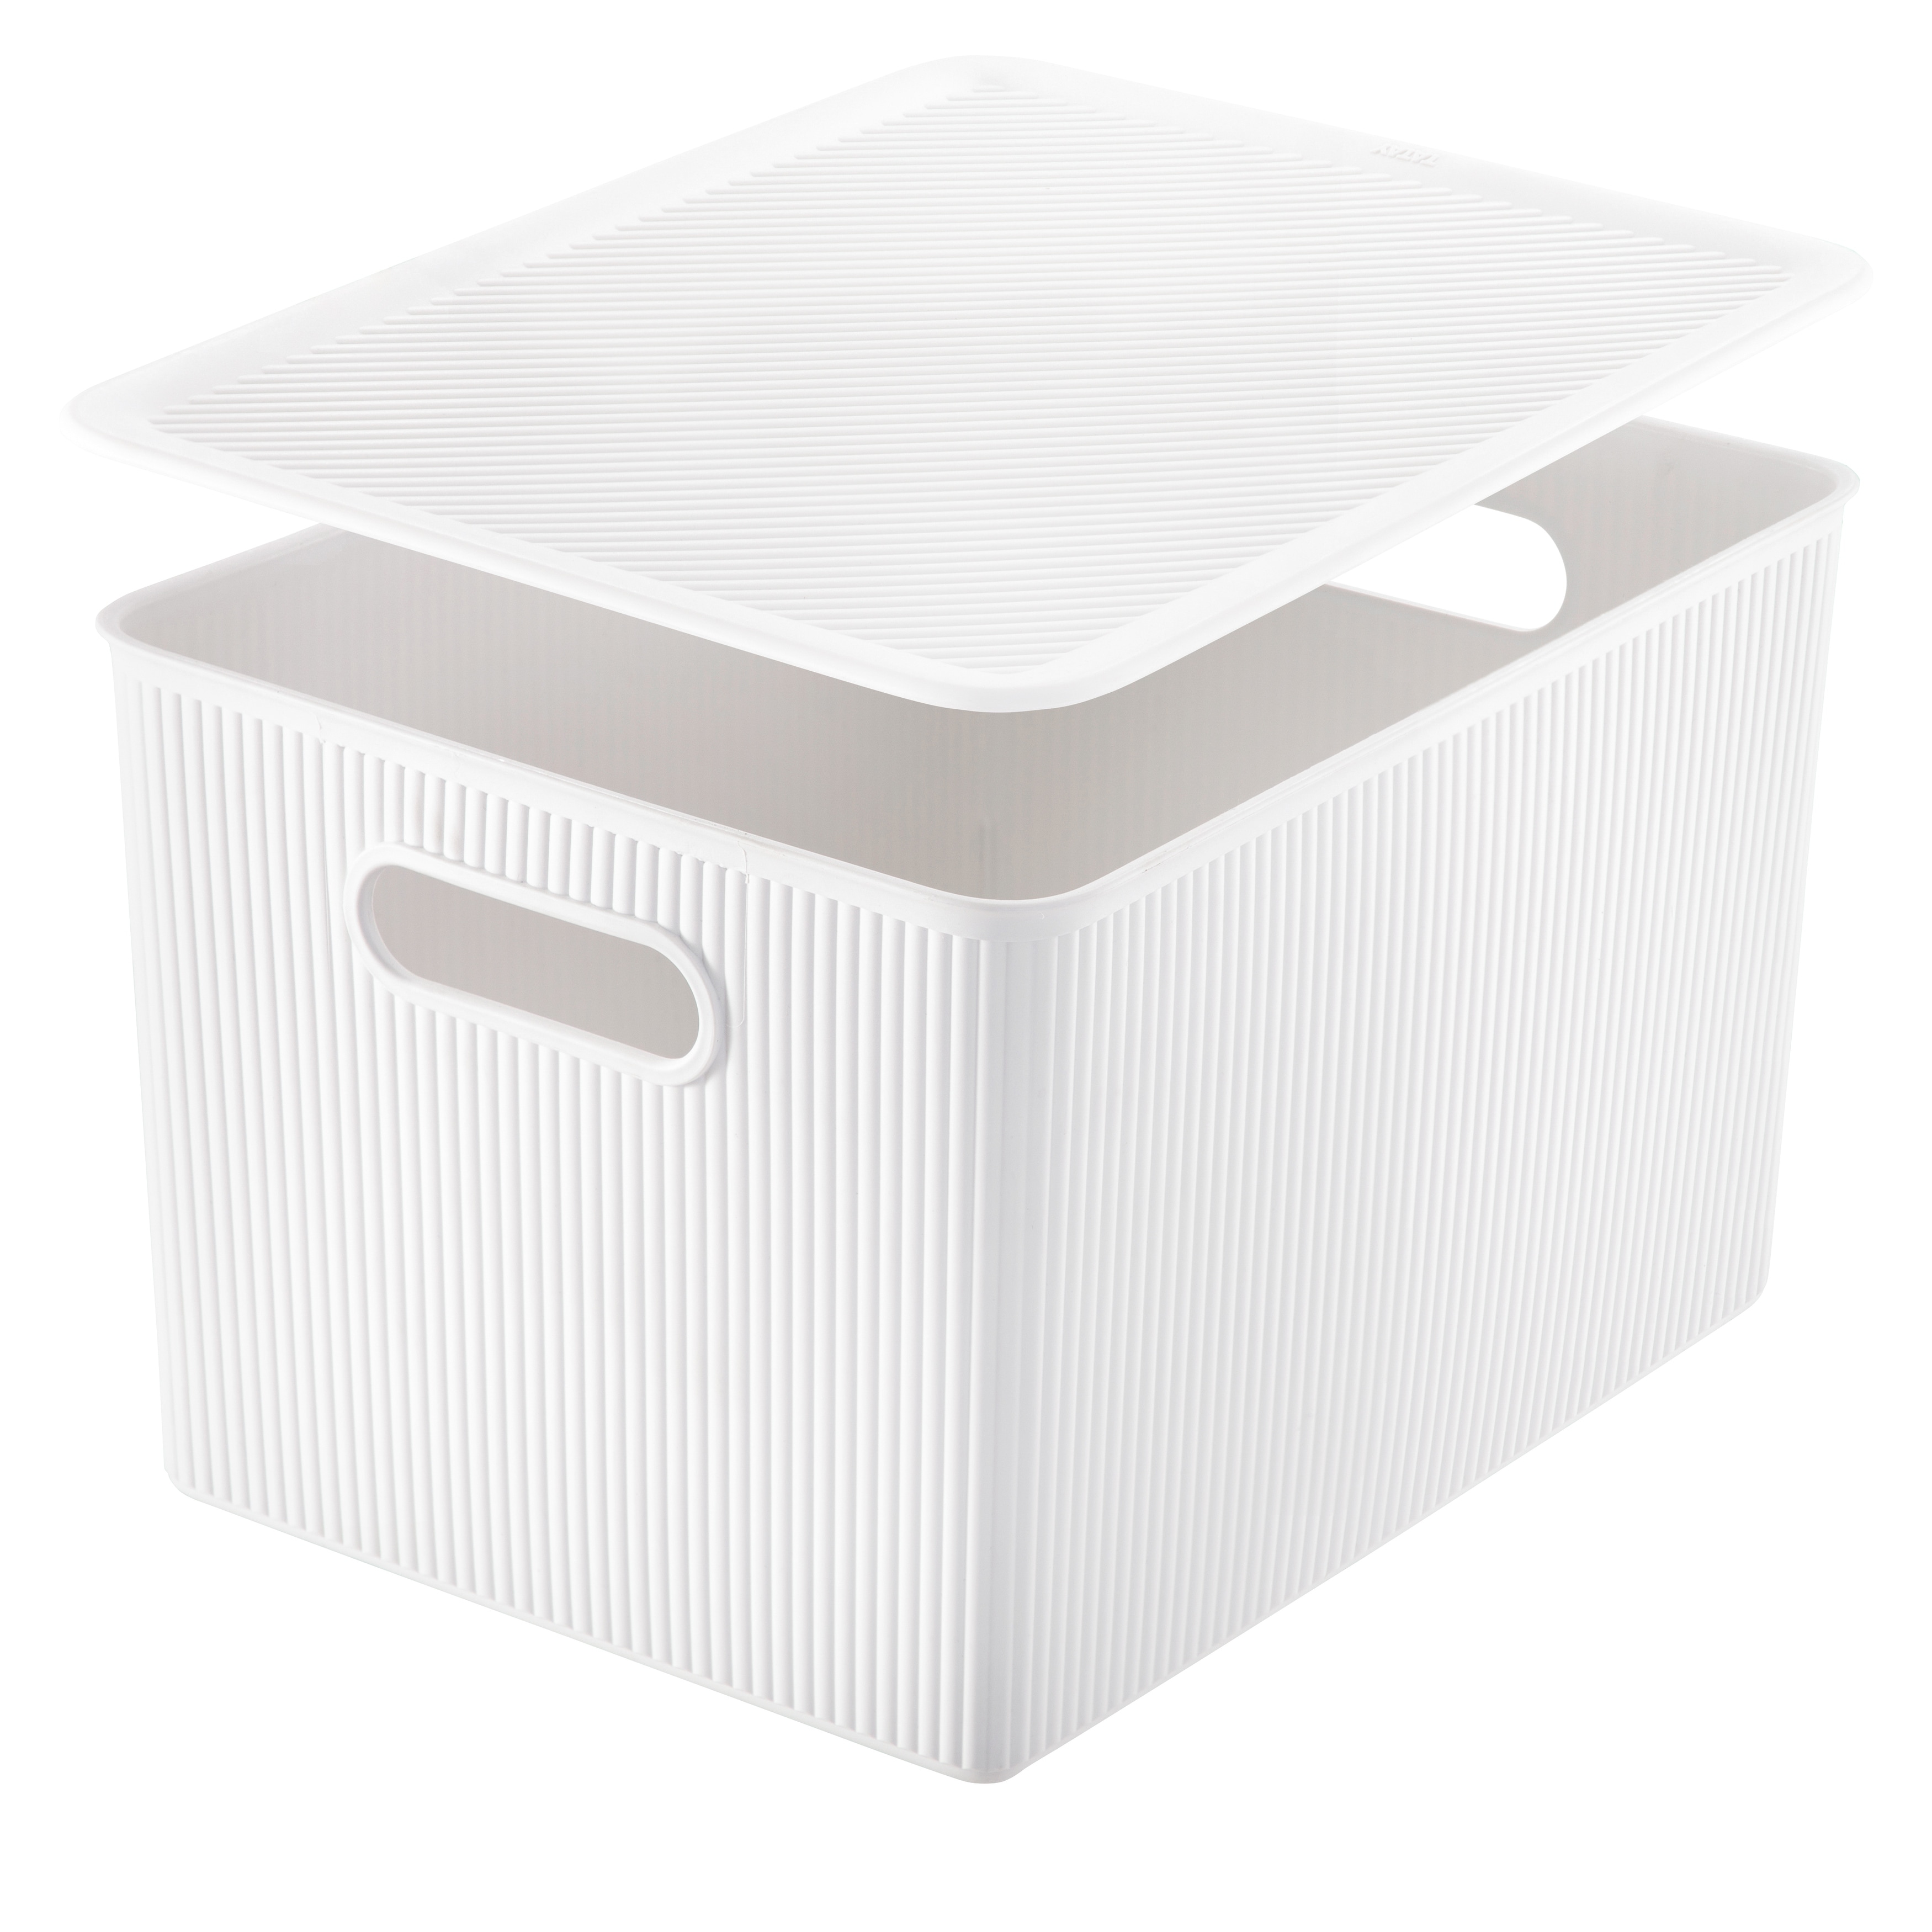 Superio Ribbed Collection - Decorative Plastic Lidded Home Storage Bins  Organizer Baskets, Medium Taupe (2 Pack - 5 Liter) Stackable Container Box